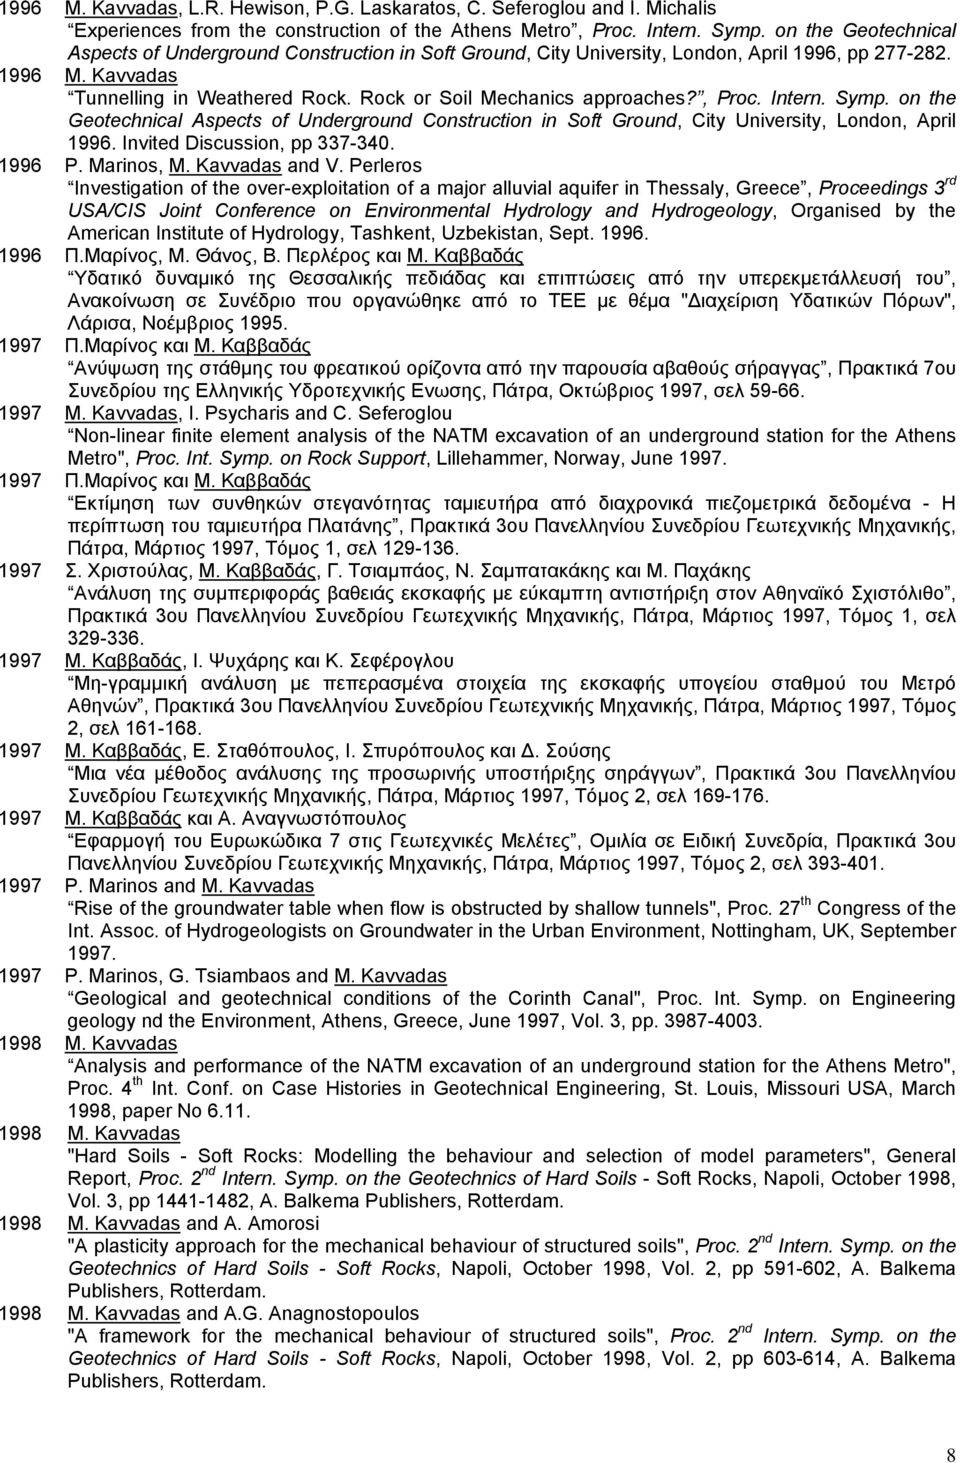 Rock or Soil Mechanics approaches?, Proc. Intern. Symp. on the Geotechnical Aspects of Underground Construction in Soft Ground, City University, London, April 1996. Invited Discussion, pp 337-340.